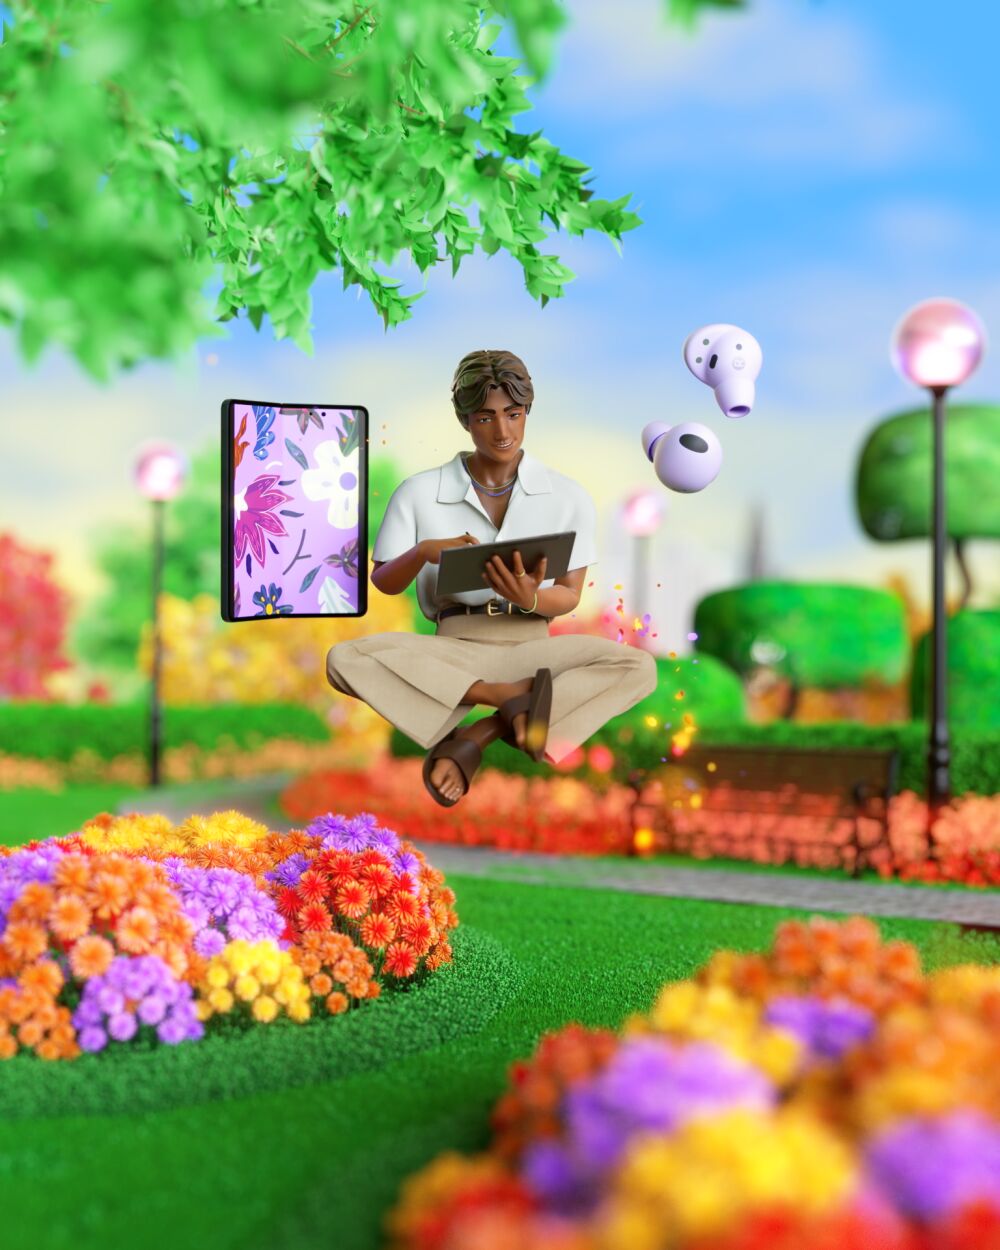 3D avatar and 3D world created by Double Up Studio for a giant telecom company and the Asian market.